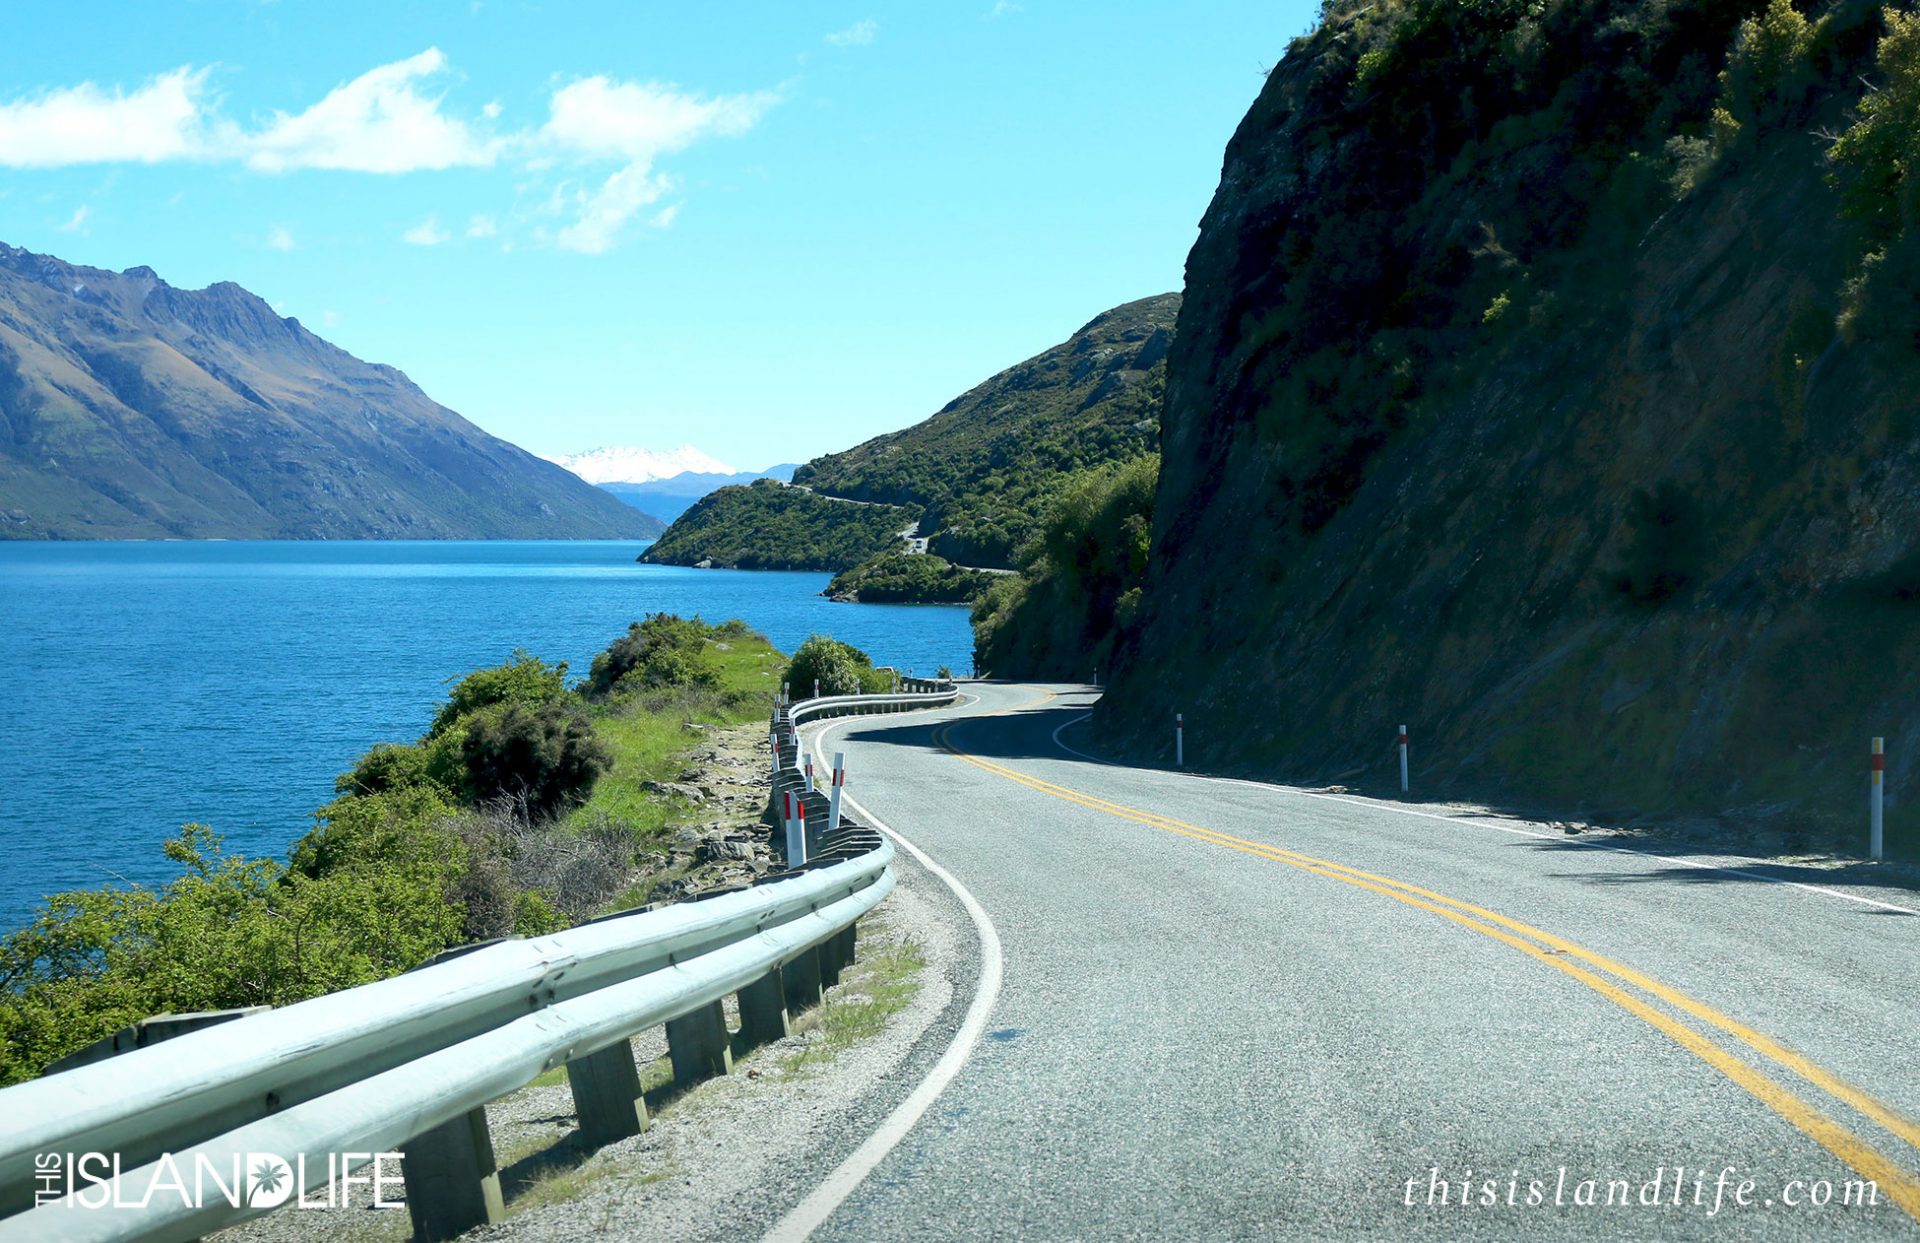 THIS ISLAND LIFE | Queenstown and Te Anau, New Zealand